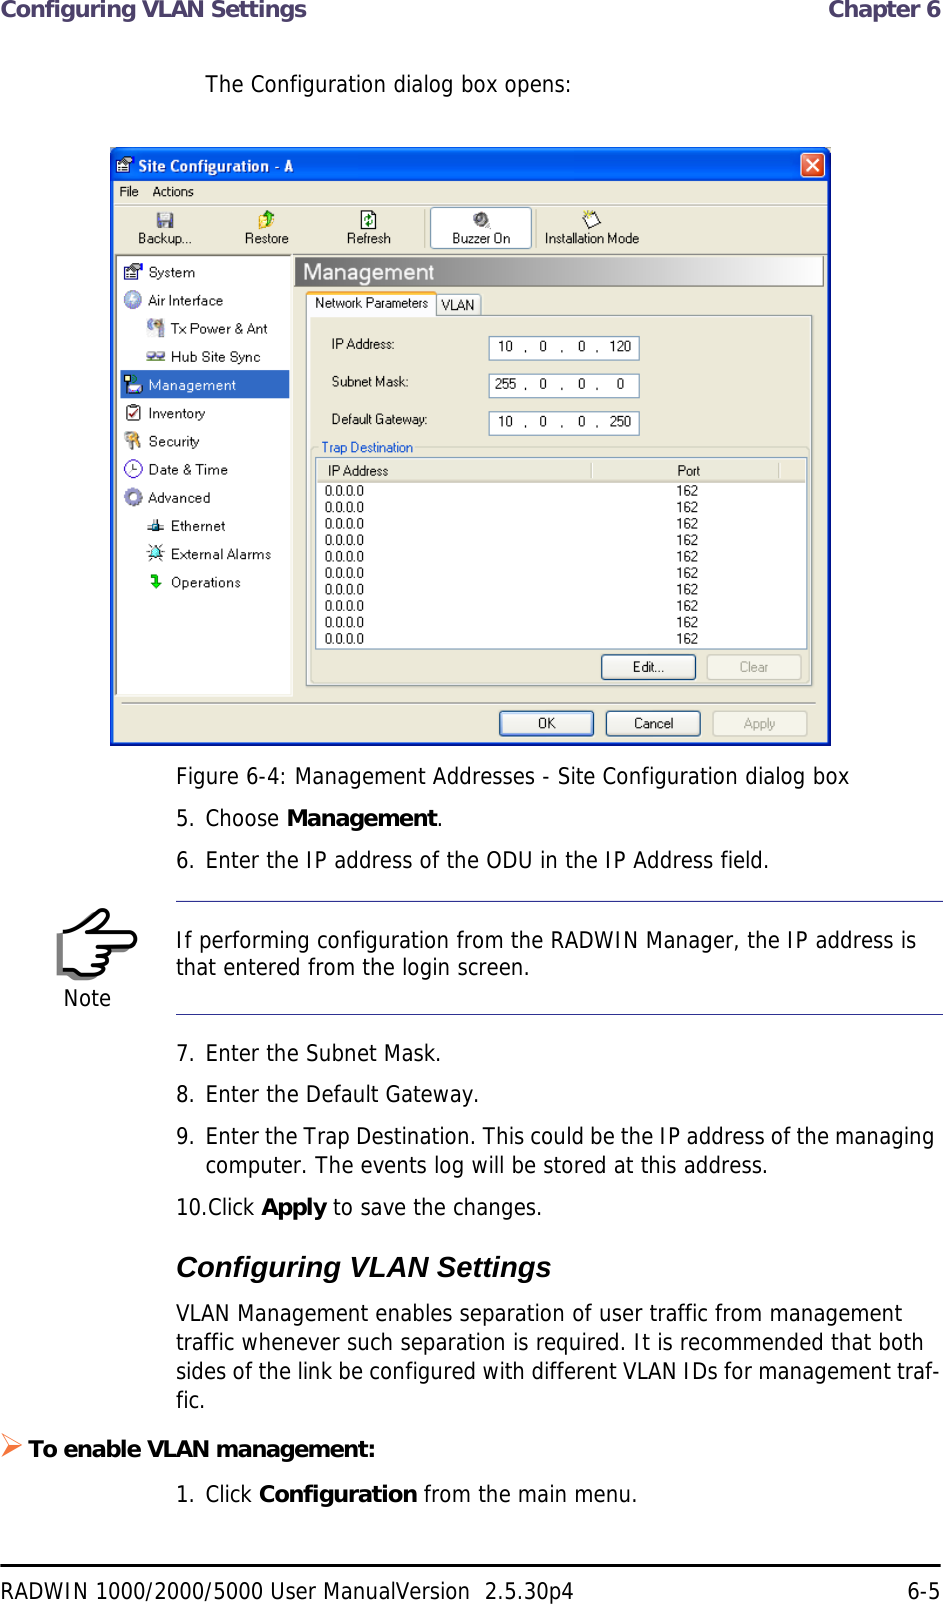 Configuring VLAN Settings  Chapter 6RADWIN 1000/2000/5000 User ManualVersion  2.5.30p4 6-5The Configuration dialog box opens:Figure 6-4: Management Addresses - Site Configuration dialog box5. Choose Management.6. Enter the IP address of the ODU in the IP Address field.7. Enter the Subnet Mask.8. Enter the Default Gateway.9. Enter the Trap Destination. This could be the IP address of the managing computer. The events log will be stored at this address.10.Click Apply to save the changes.Configuring VLAN SettingsVLAN Management enables separation of user traffic from management traffic whenever such separation is required. It is recommended that both sides of the link be configured with different VLAN IDs for management traf-fic.To enable VLAN management:1. Click Configuration from the main menu.NoteIf performing configuration from the RADWIN Manager, the IP address is that entered from the login screen.